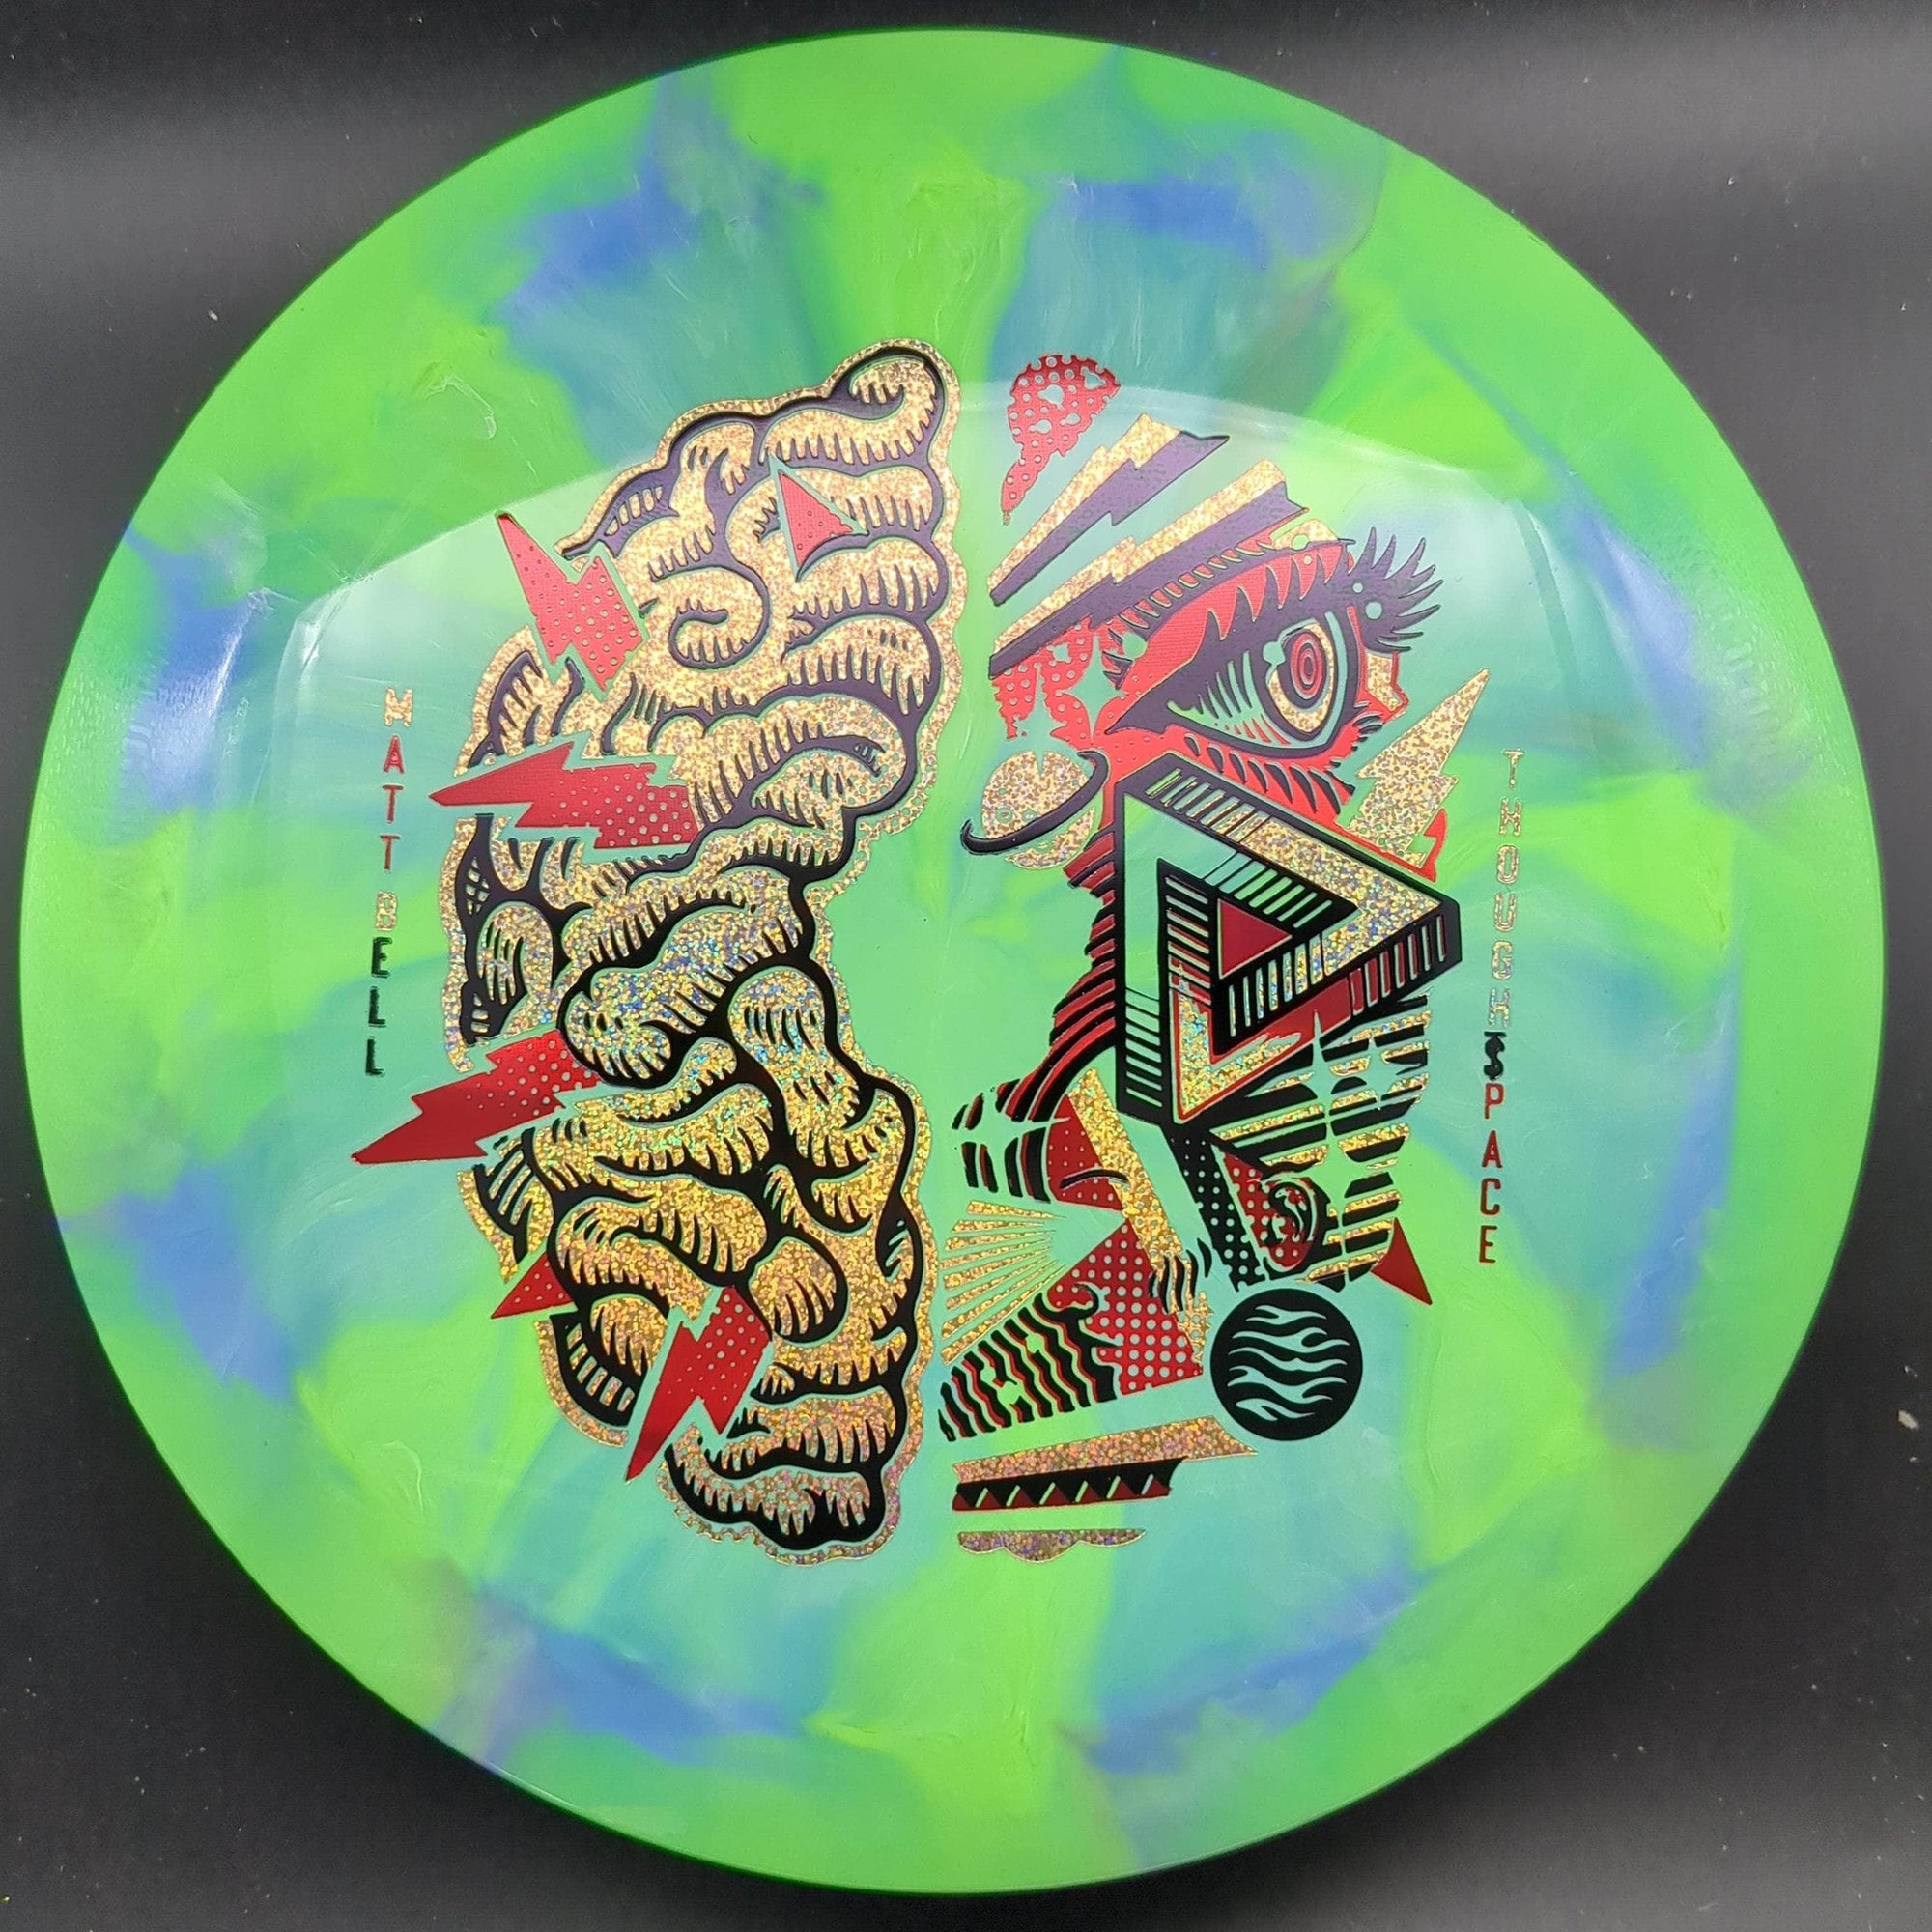 Thought Space Athletics Distance Driver Green/Blue Gold/Red Stamp 174g Synapse, Nebula Aura, Matt Bell